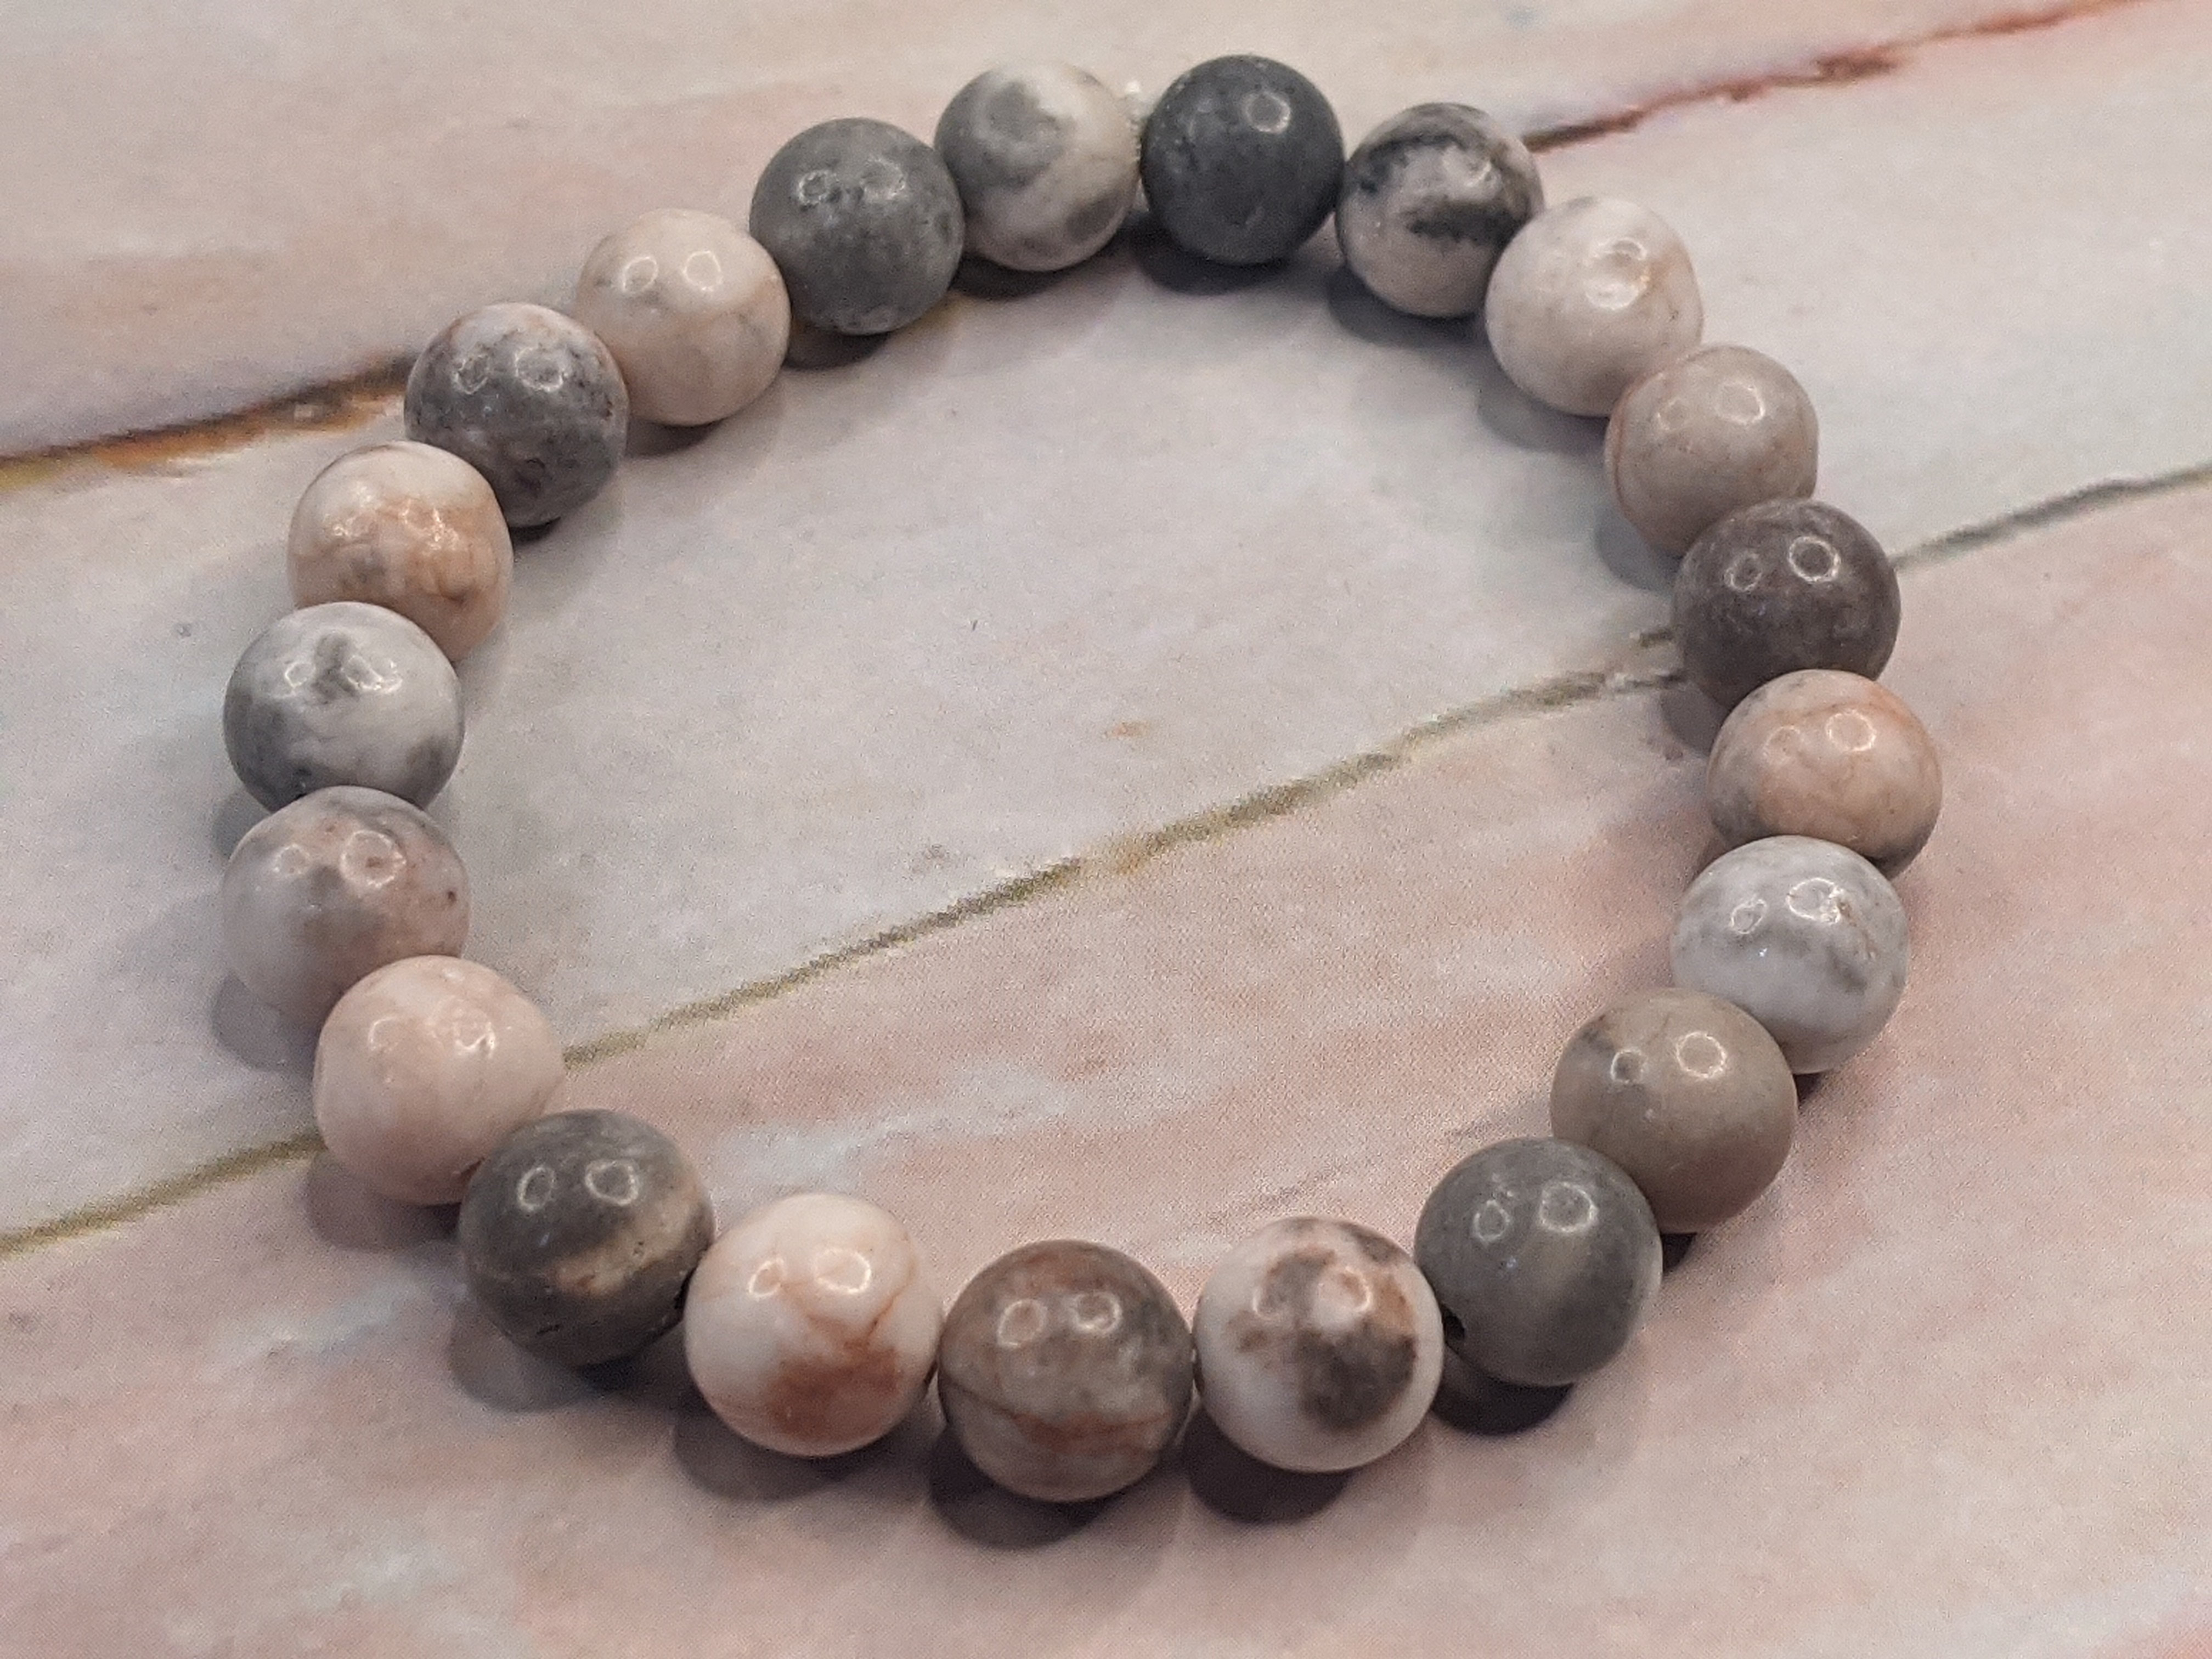 7 Chakra Stone Bracelets - All You Need to Know About